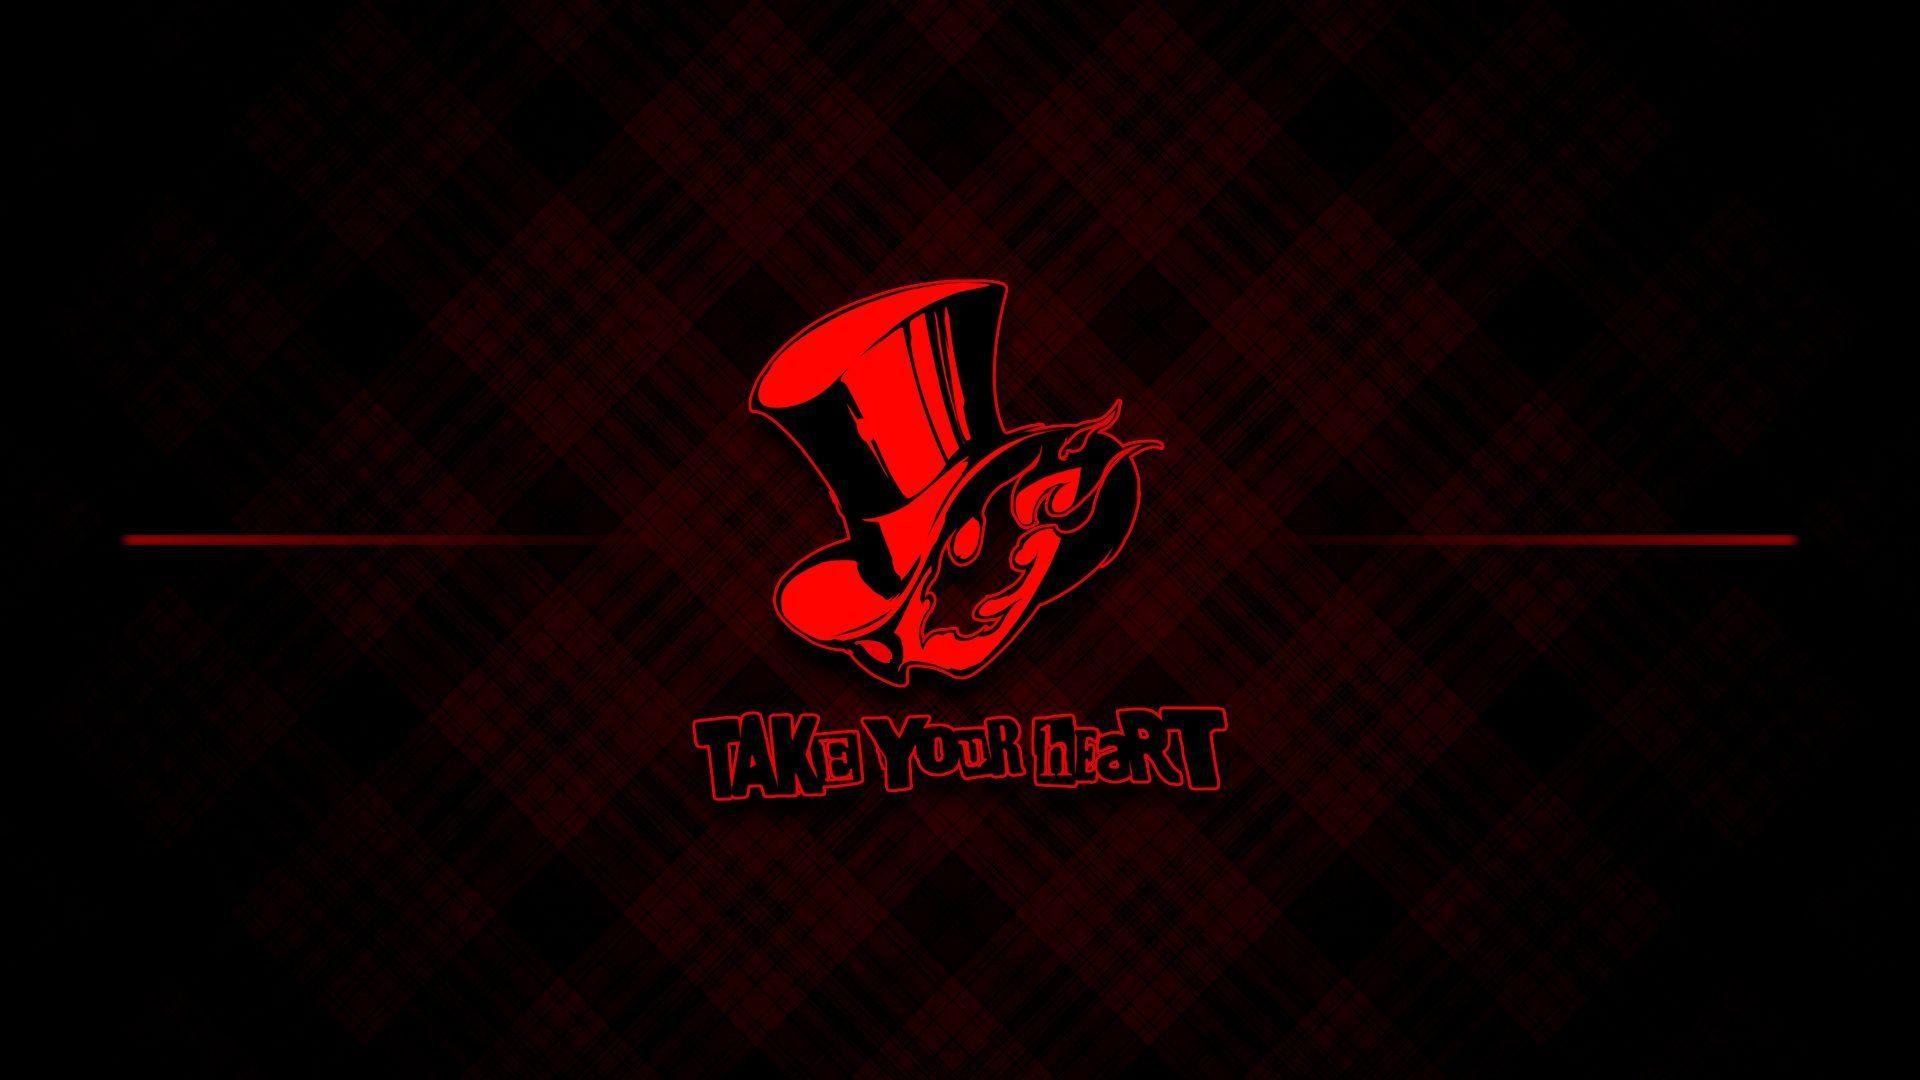 Persona 5 Logo Wallpapers Top Free Persona 5 Logo Backgrounds Wallpaperaccess